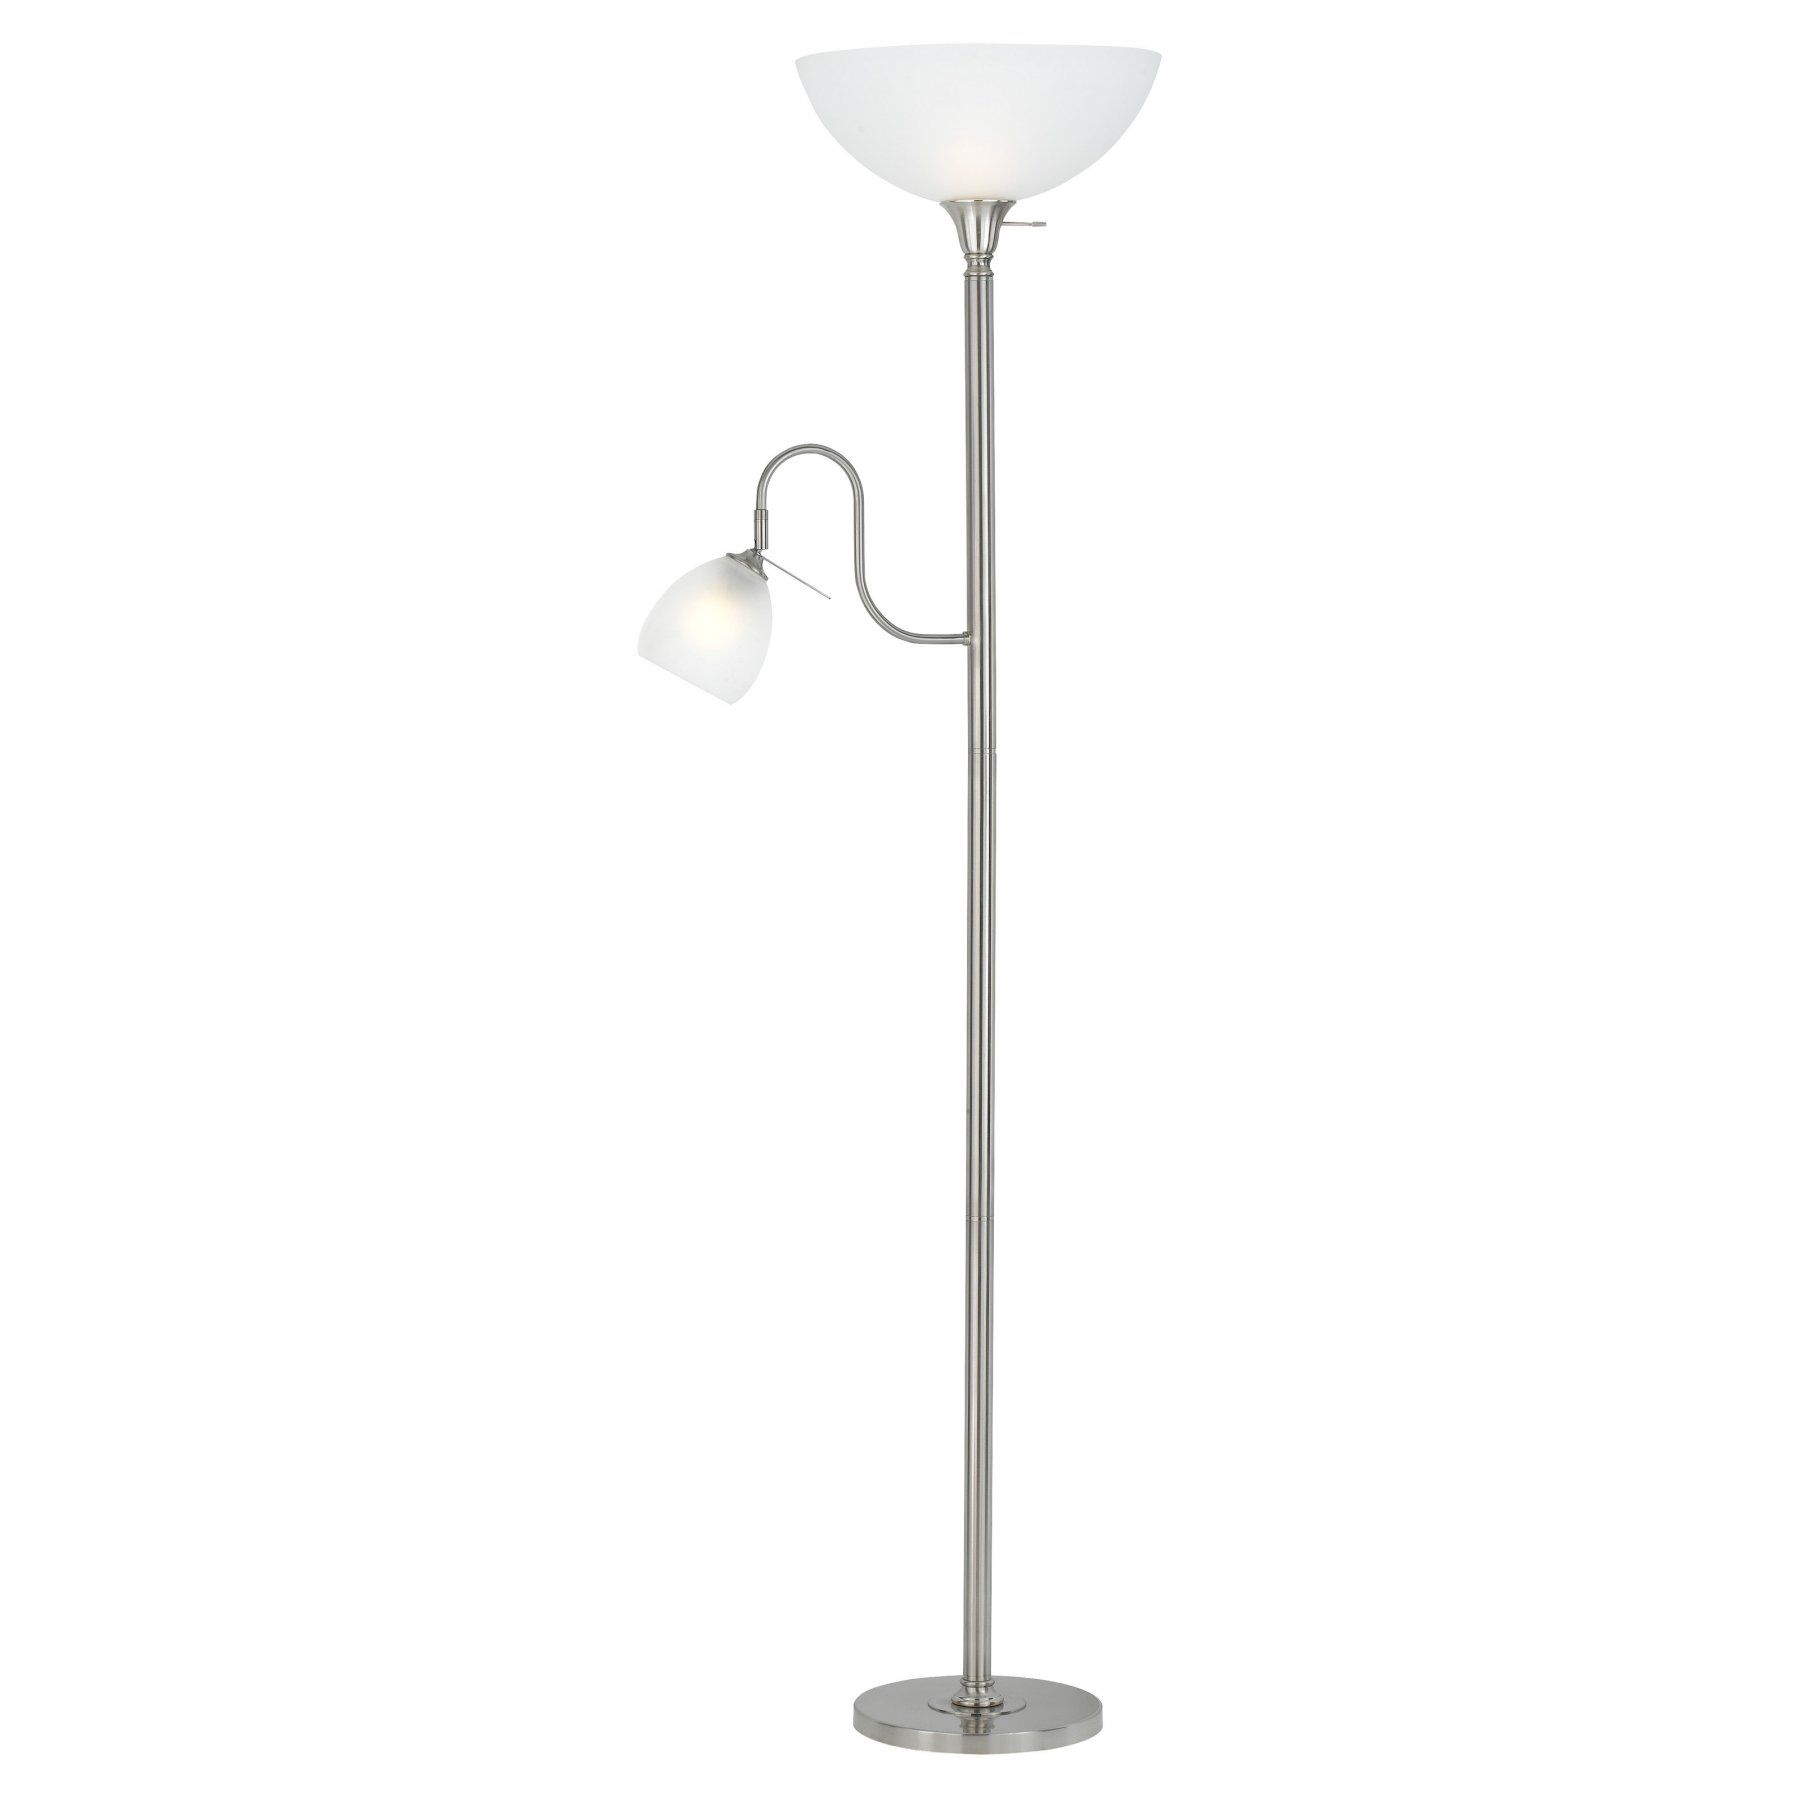 Cal Lighting Bo 2054 Bs Torchiere And Reading Floor Lamp in size 1800 X 1800